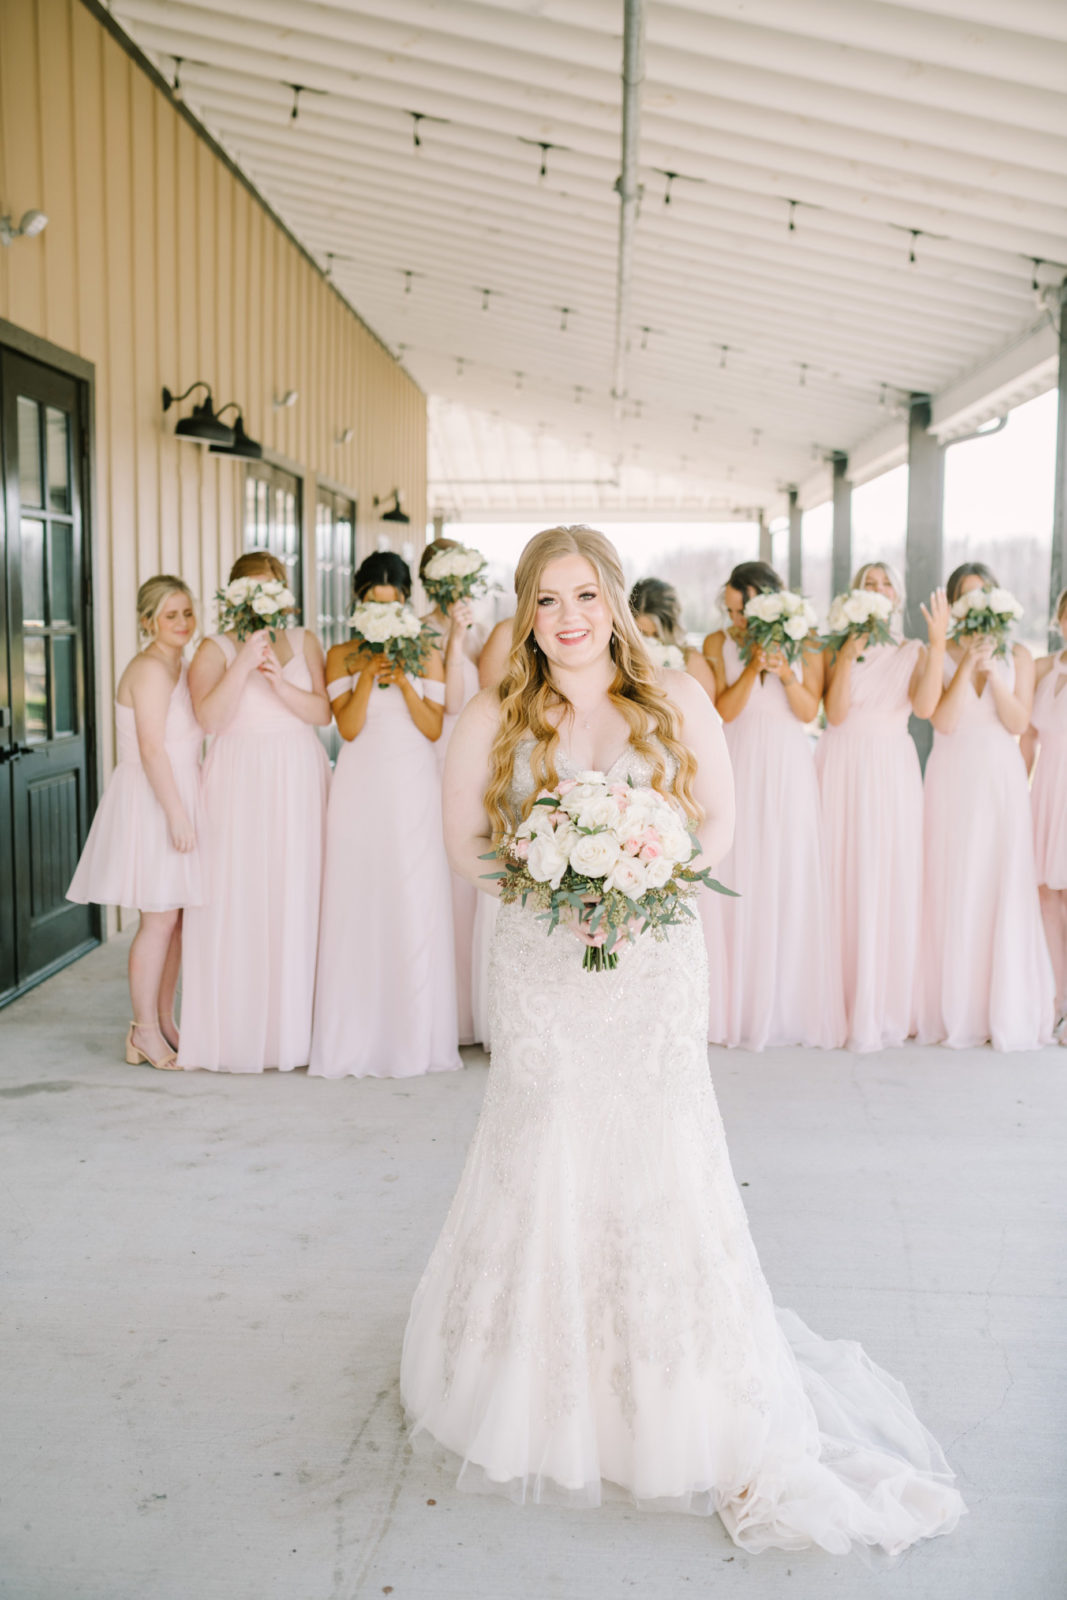 The bride waits to surprise her bridesmaids with her wedding gown by Christina Elliott Photography. Still Waters Ranch wed #ChristinaElliottPhotography #ChristinaElliottWeddings #StillWatersRanchWedding #Texasweddings #countrywedding #ranchwedding